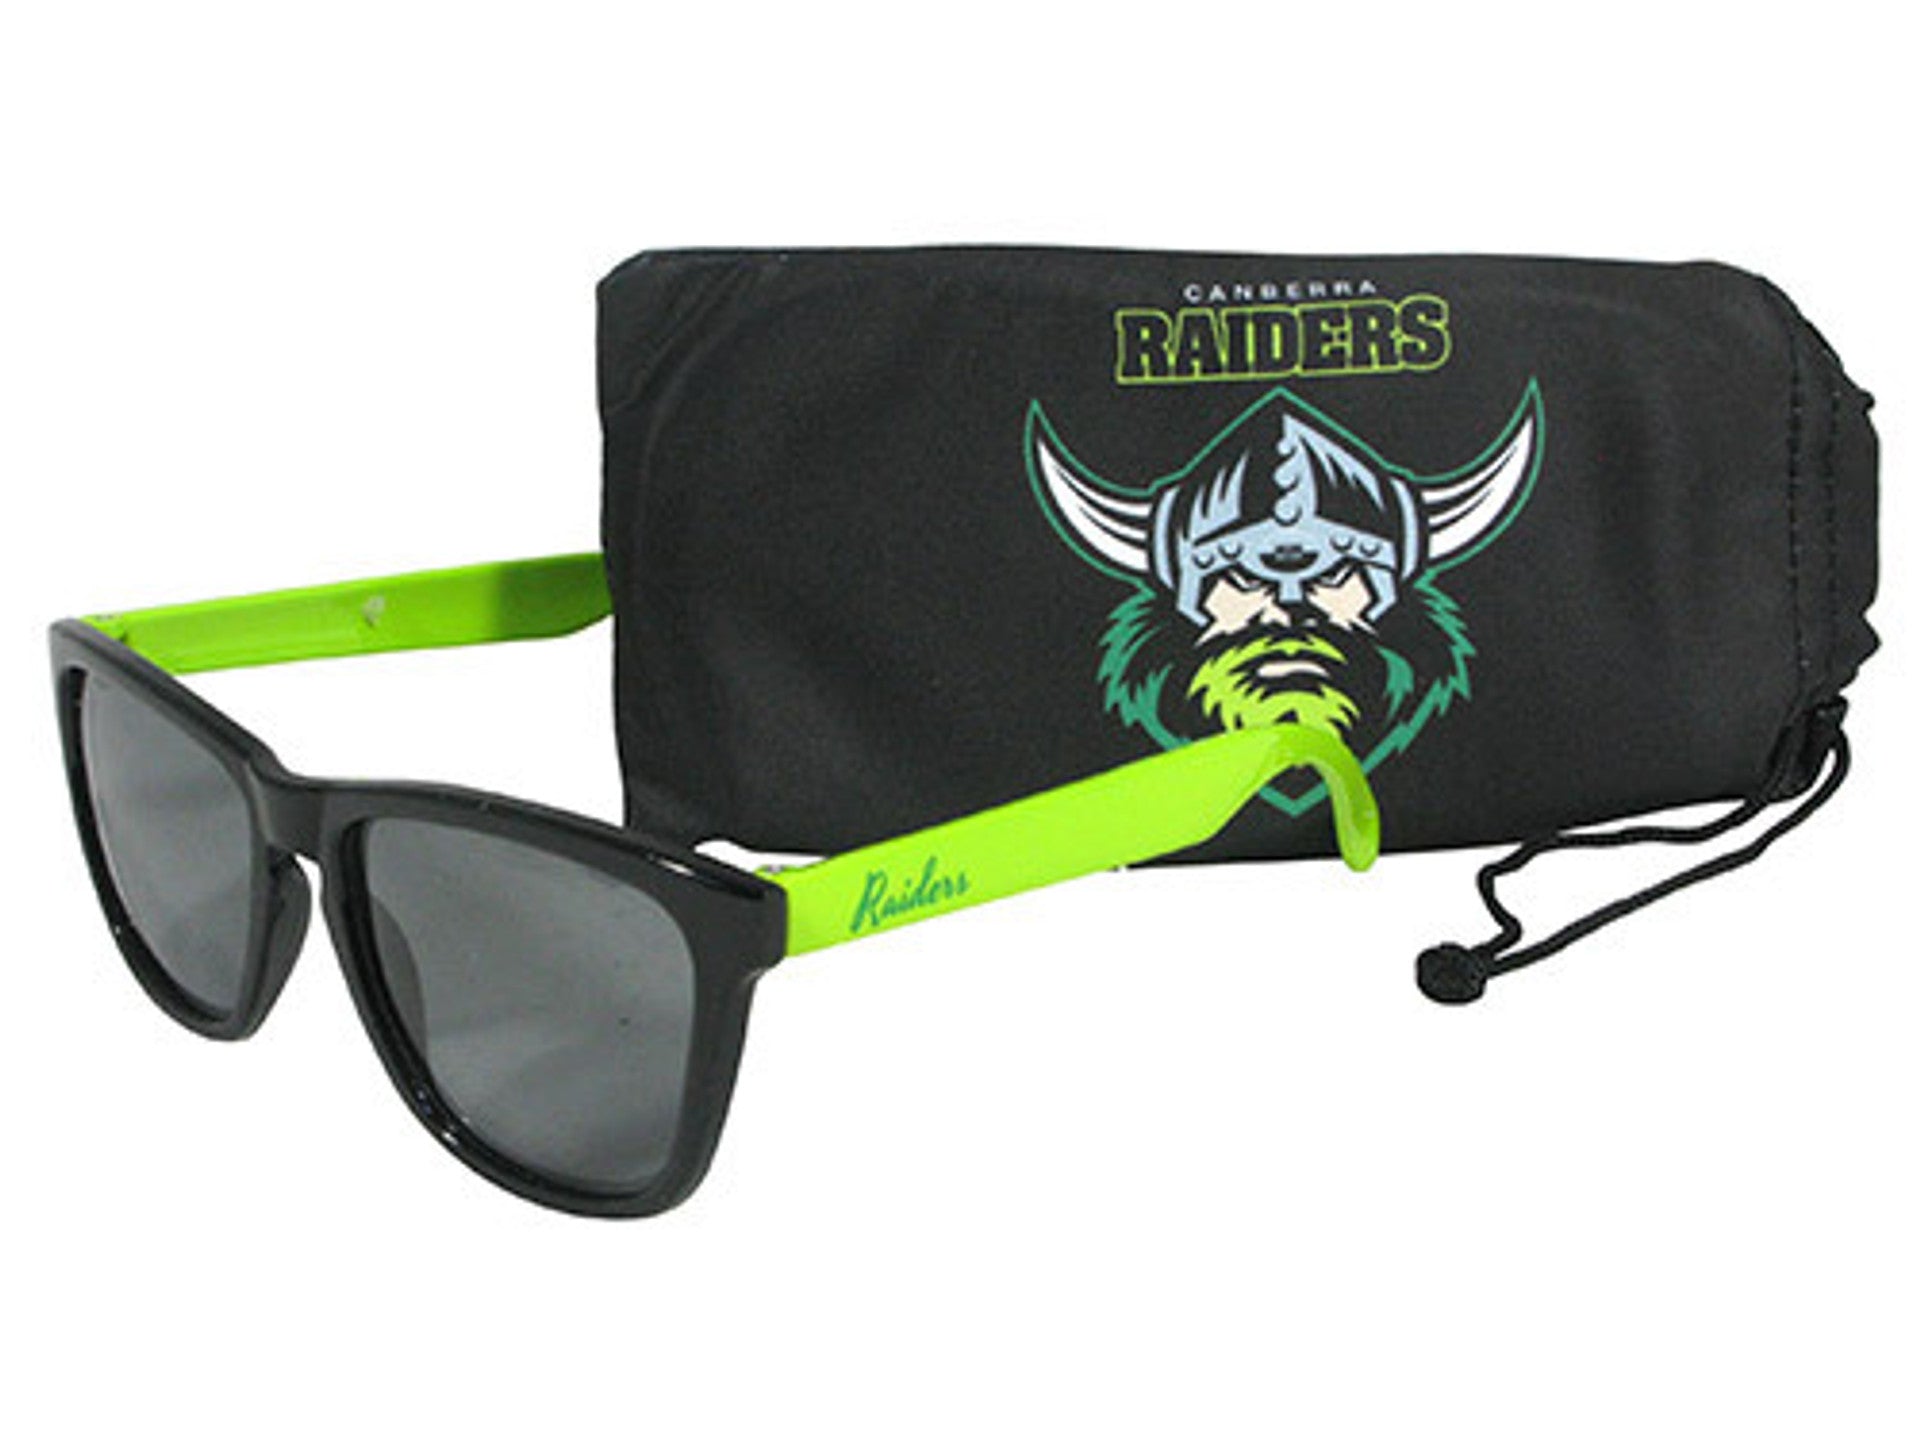 Canberra Raiders Sunglasses with Case